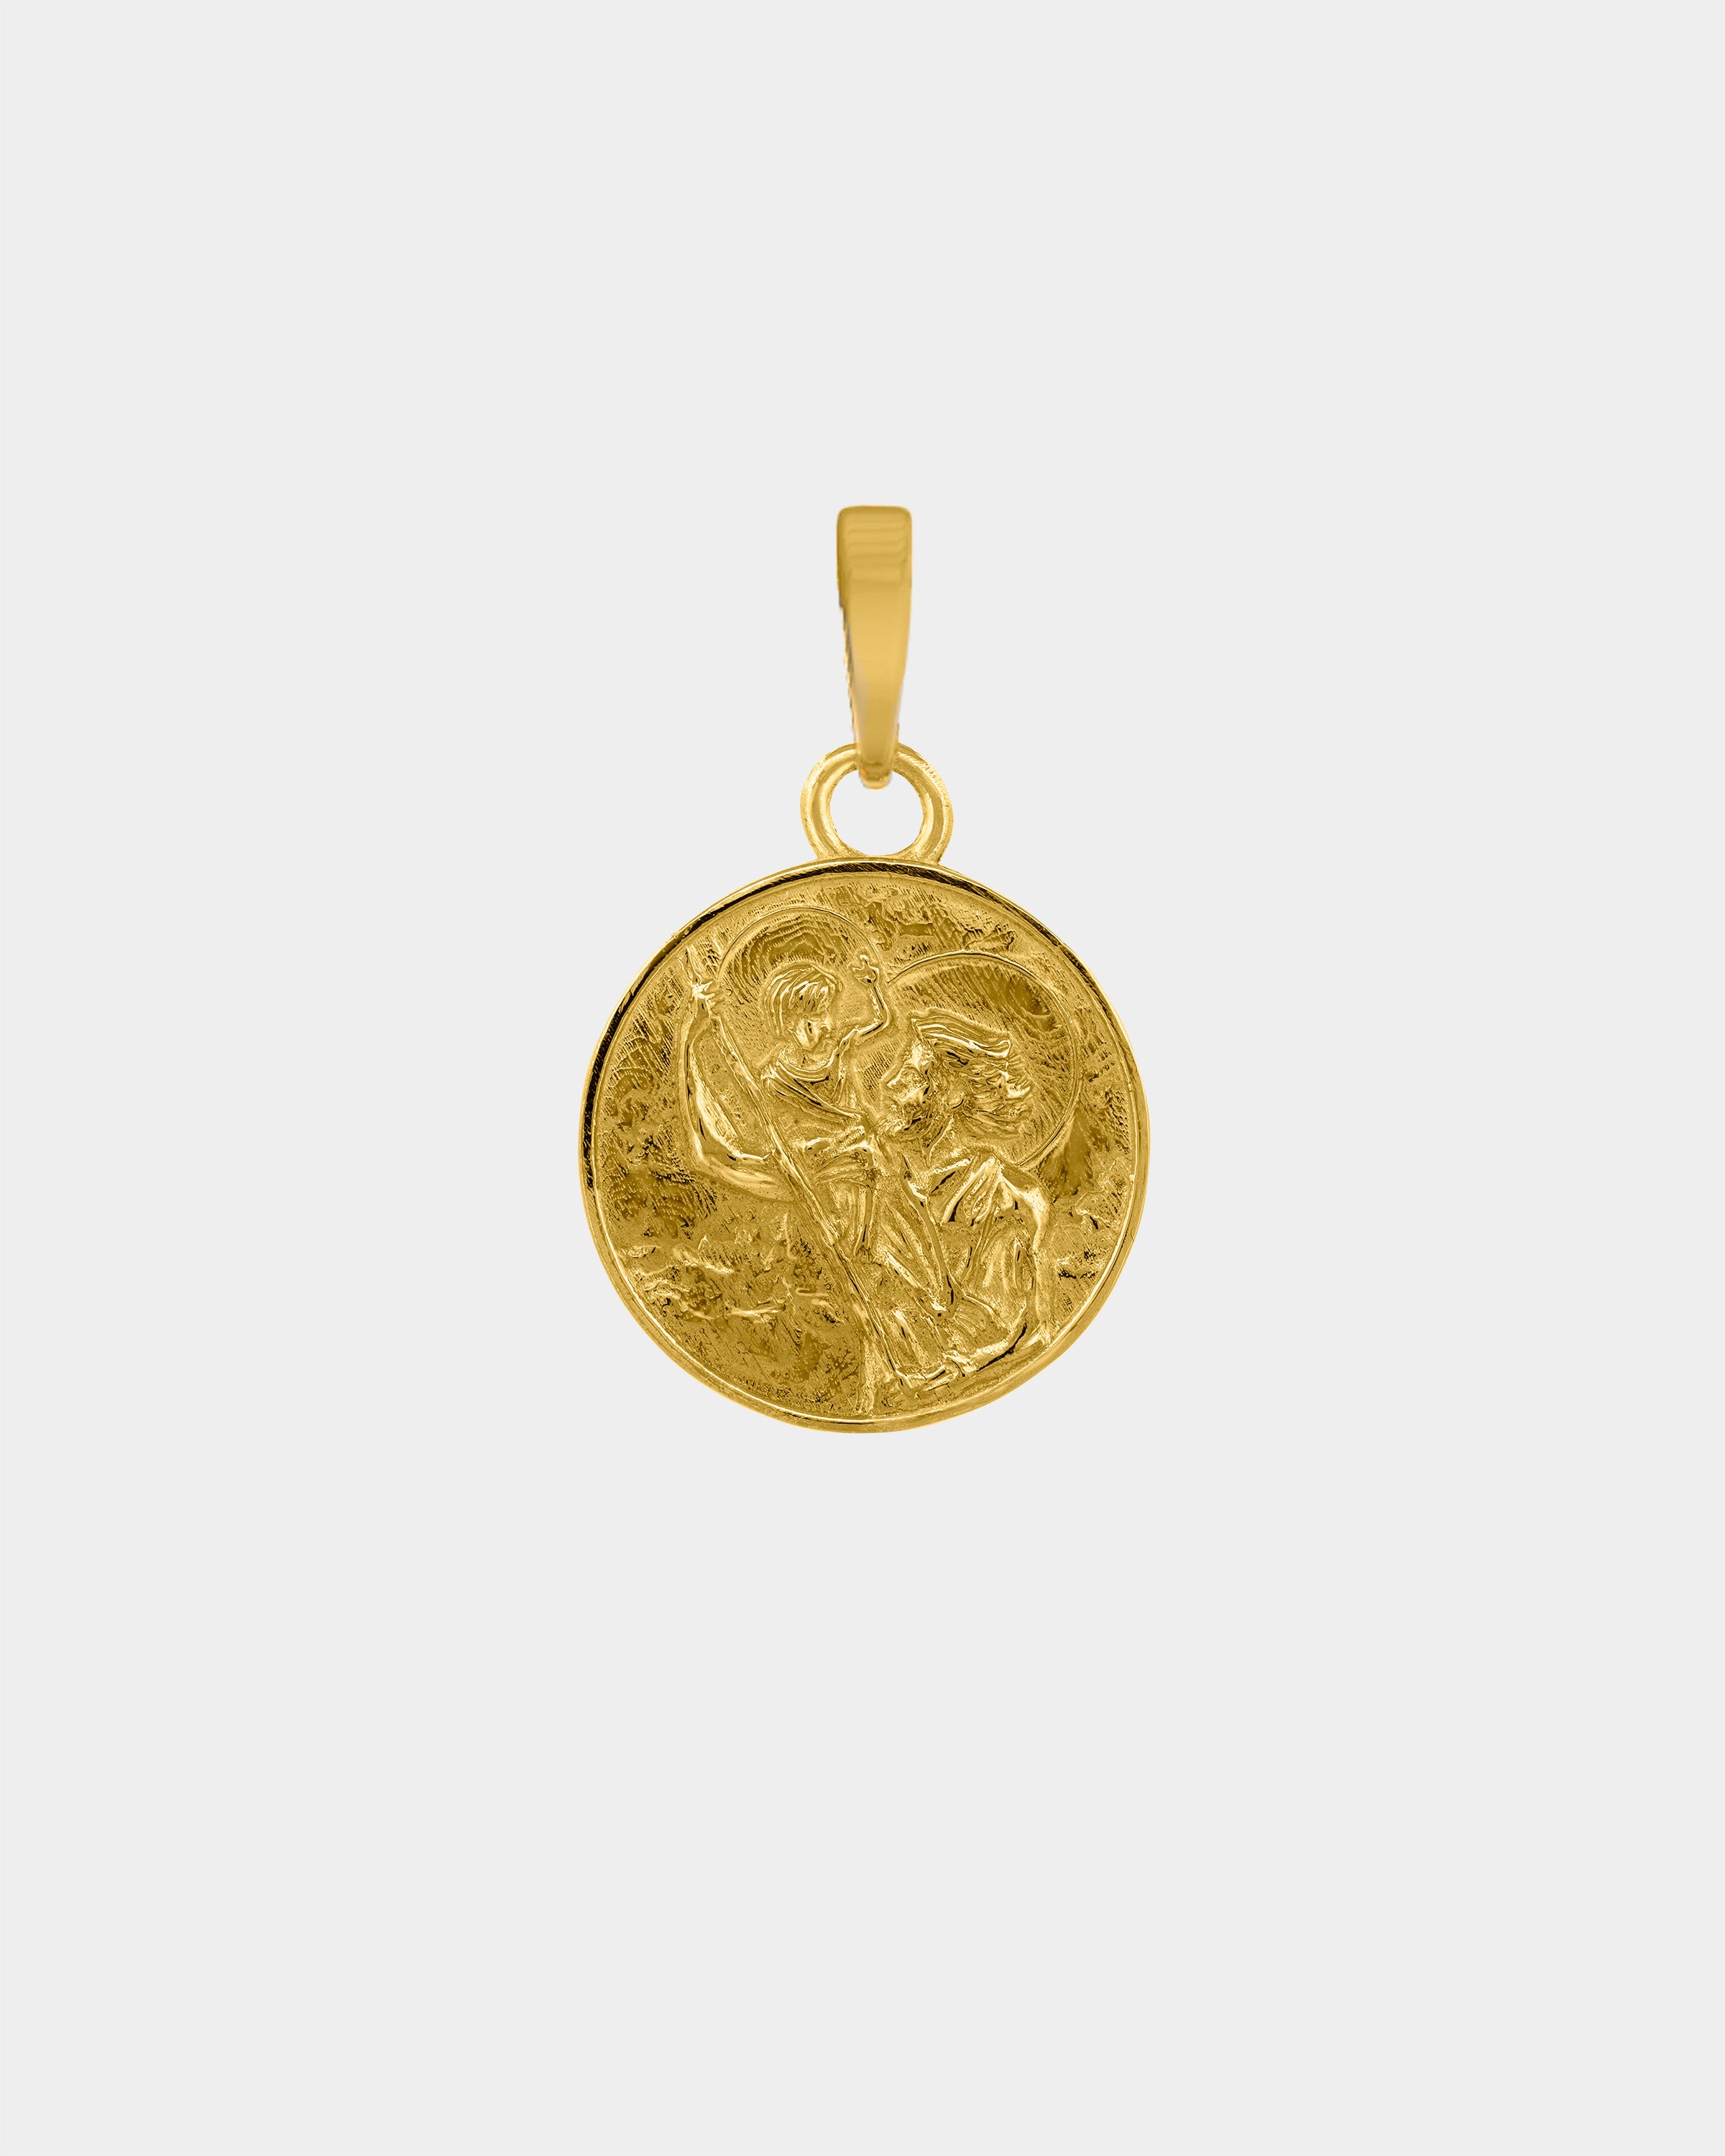 St Christopher Necklace - Round Pendant Necklace In Gold